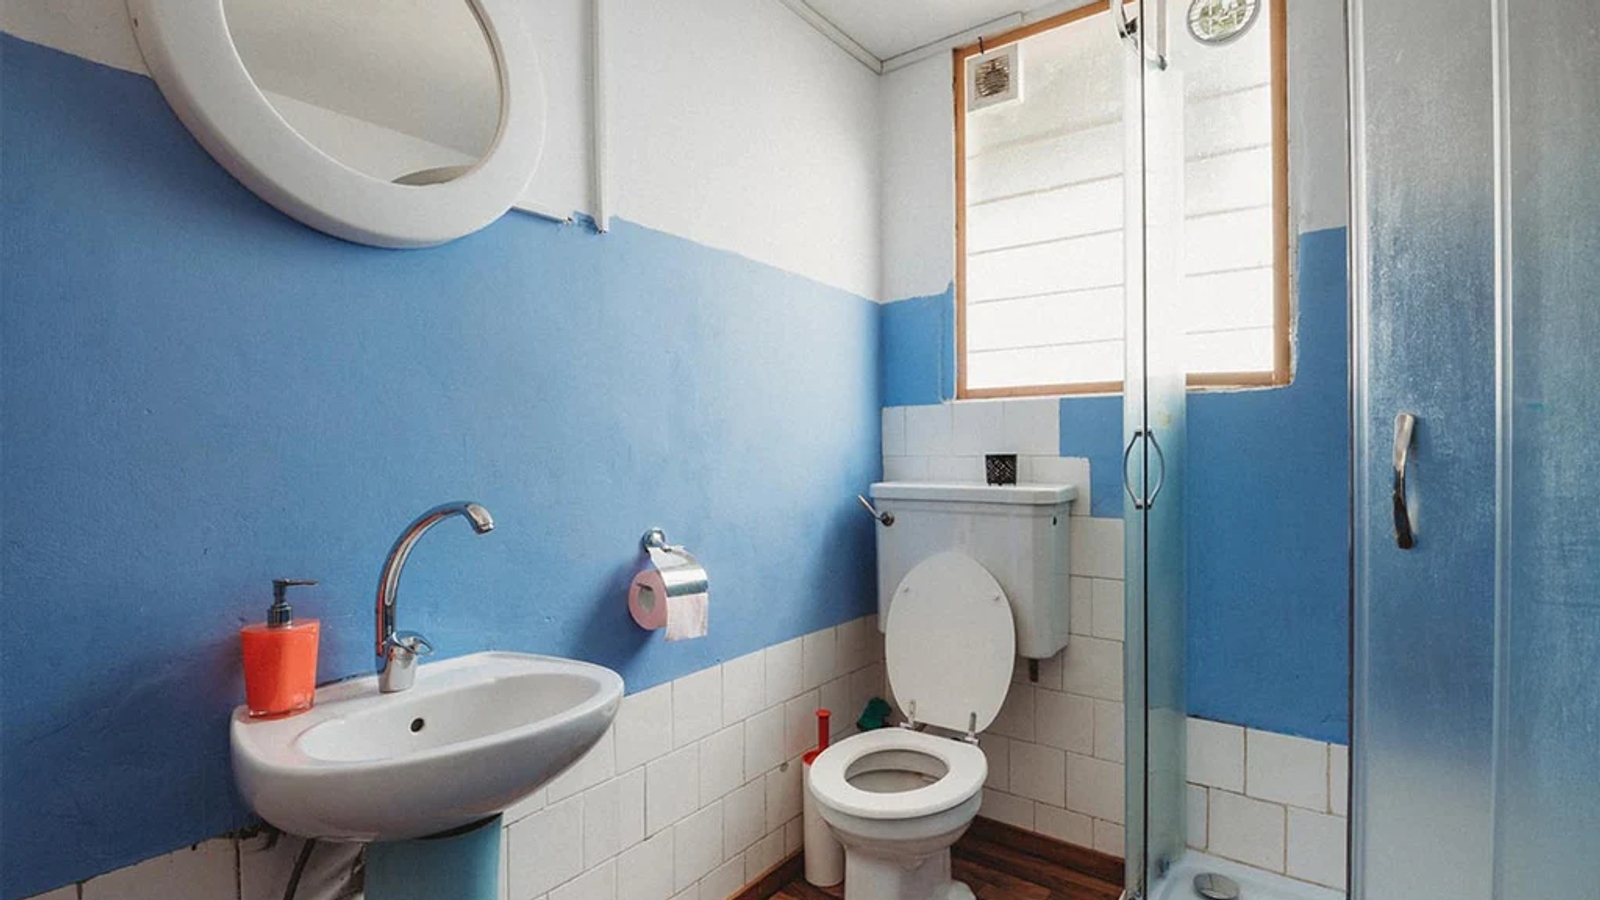 a bathroom with a toilet, sink and glass shower cubicle, with blue walls